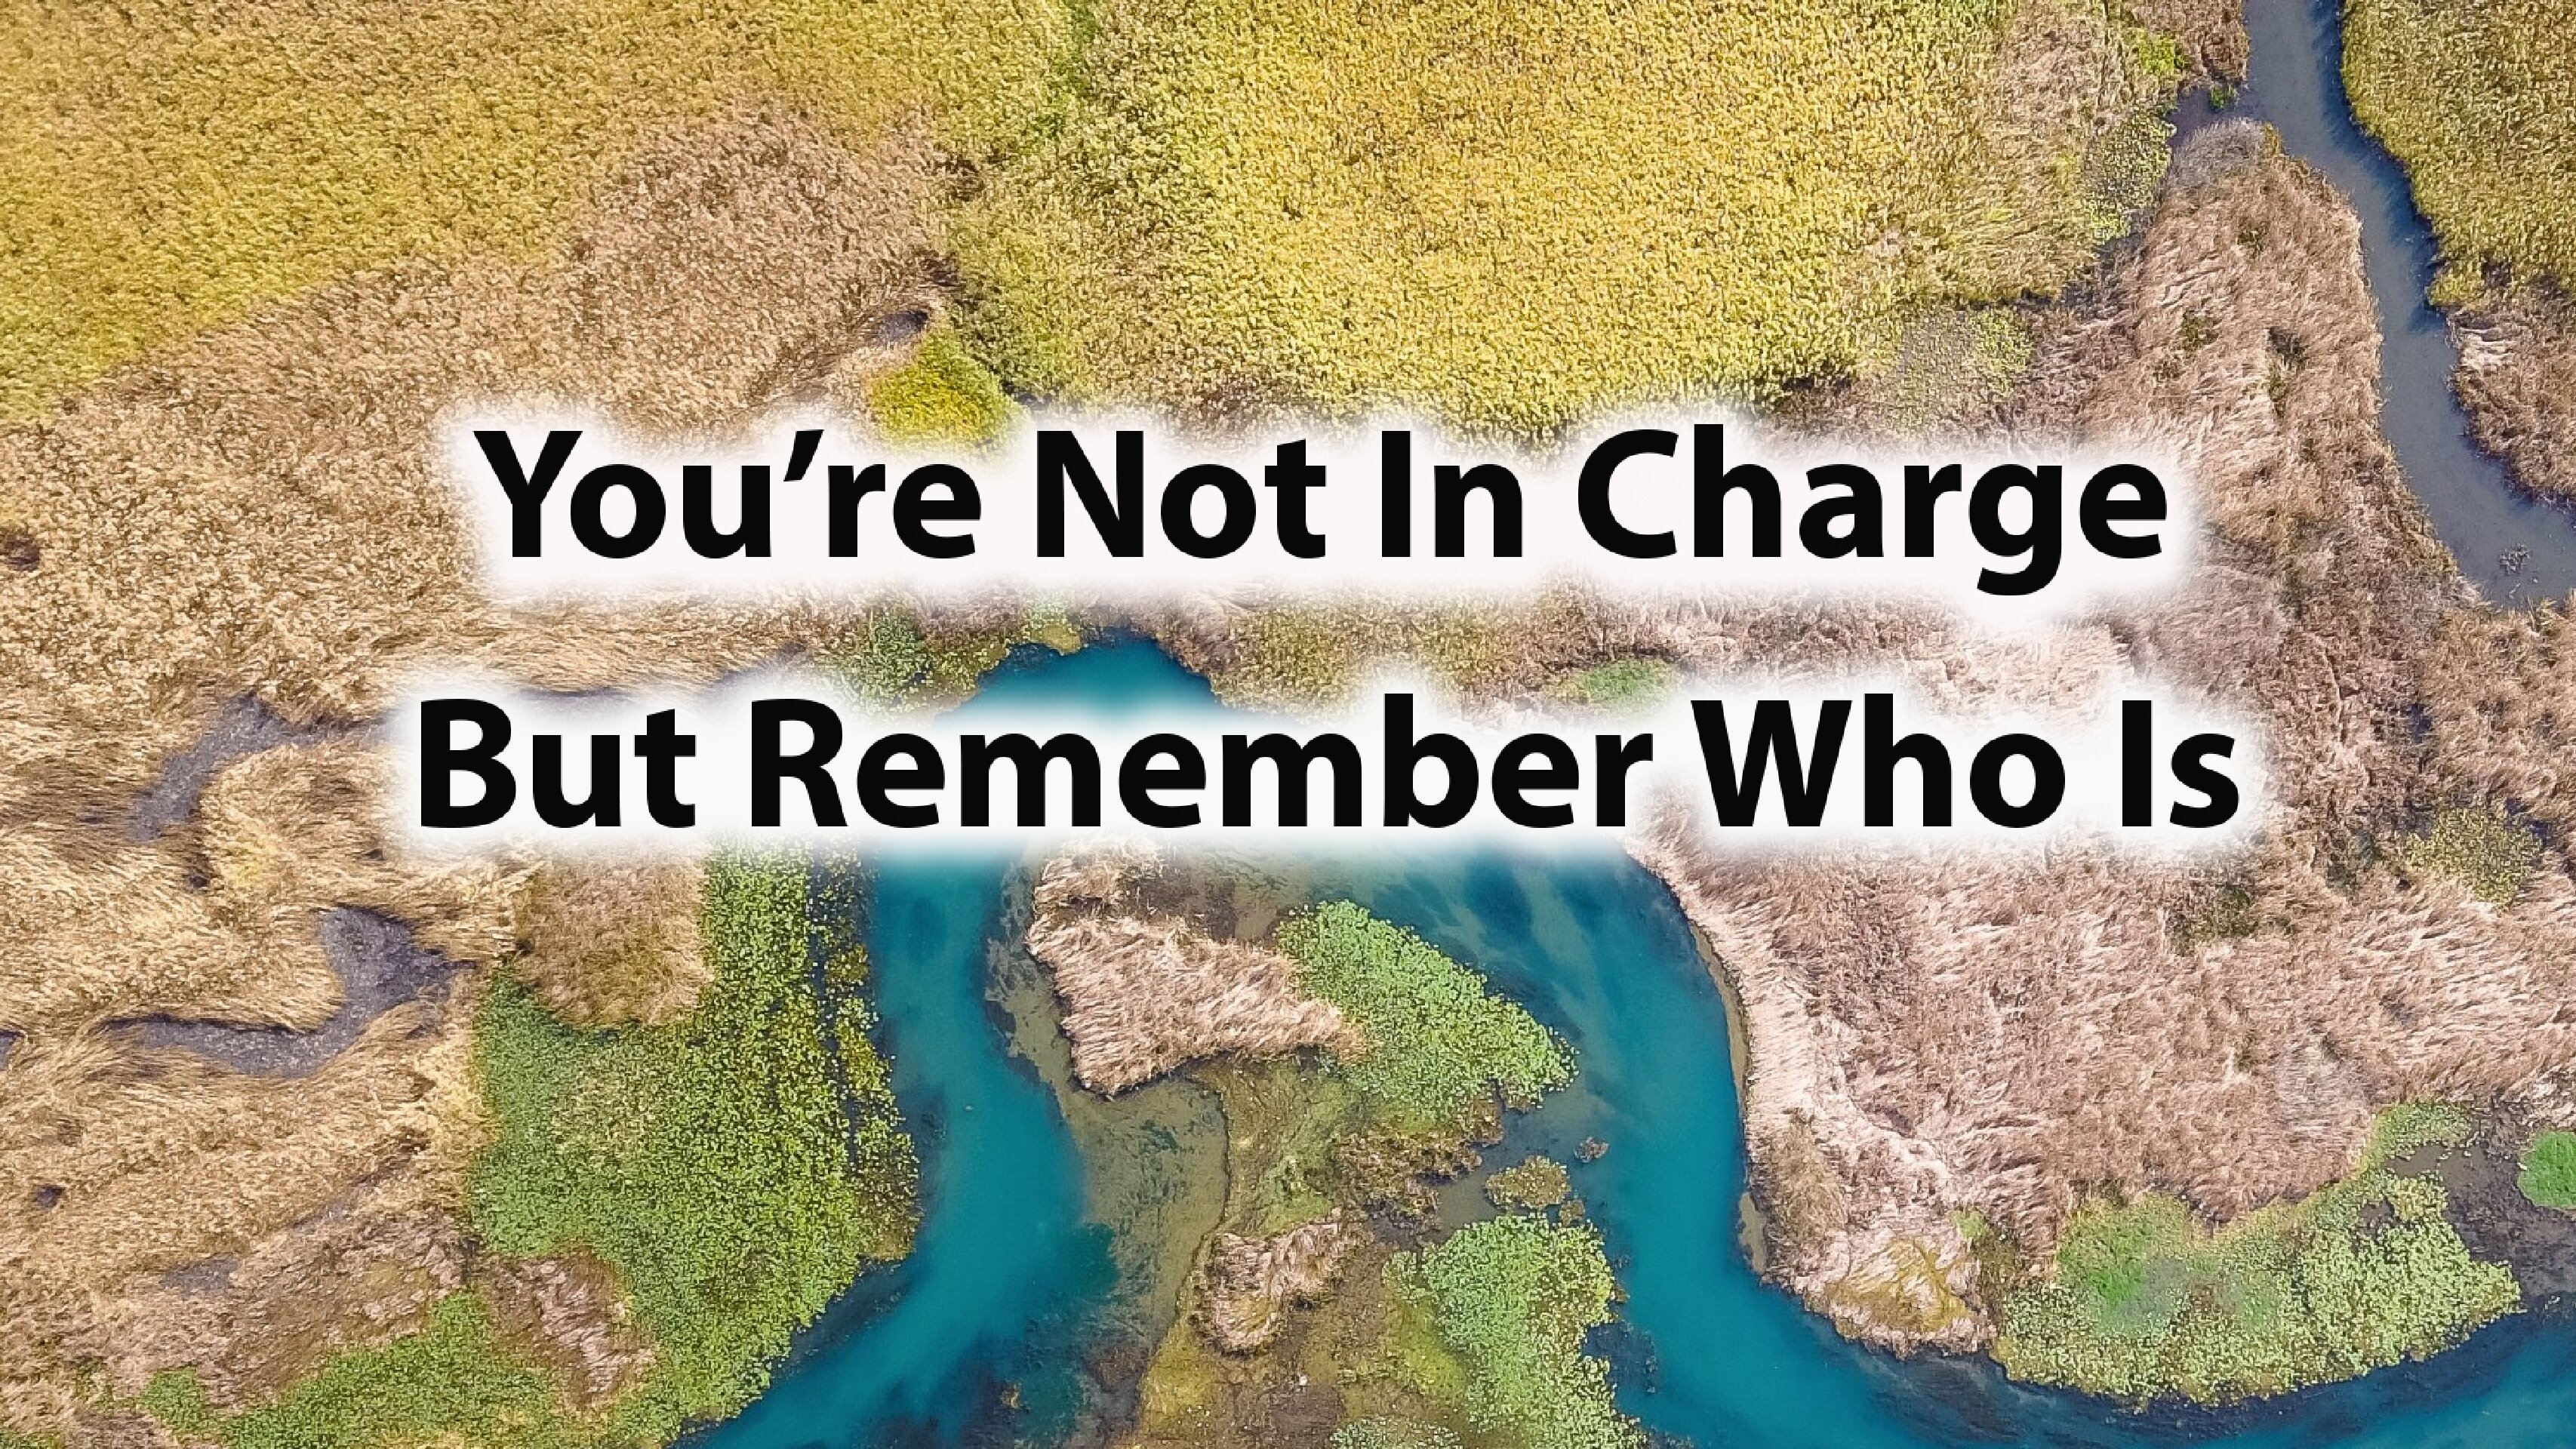 You’re Not in Charge, But Remember Who Is